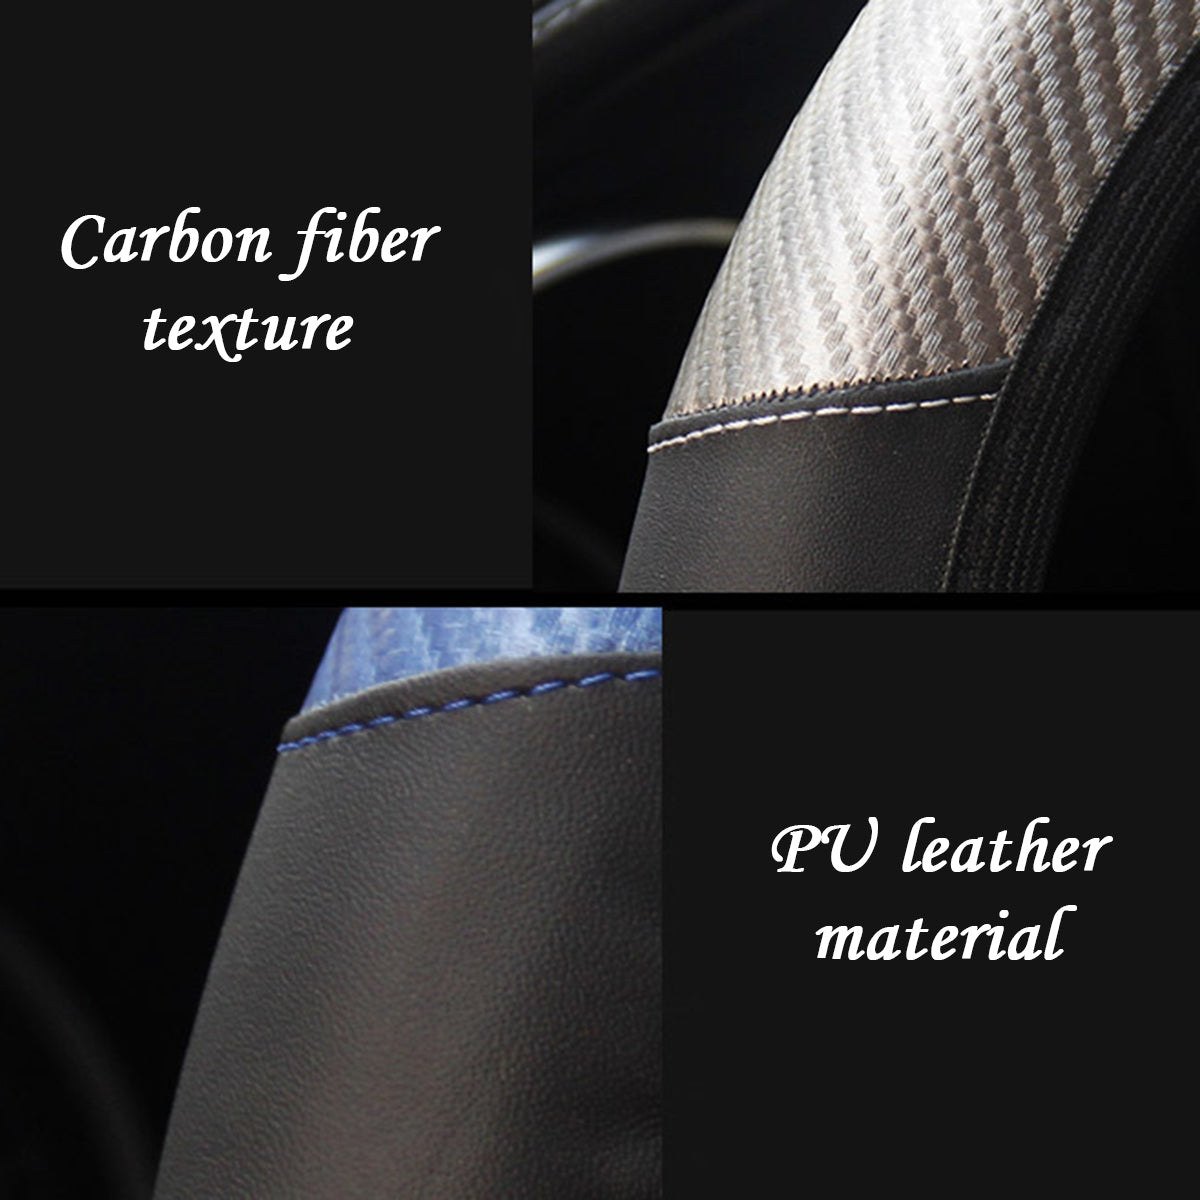 Car Steering Wheel Cover Universal Fiber PU Leather Protector